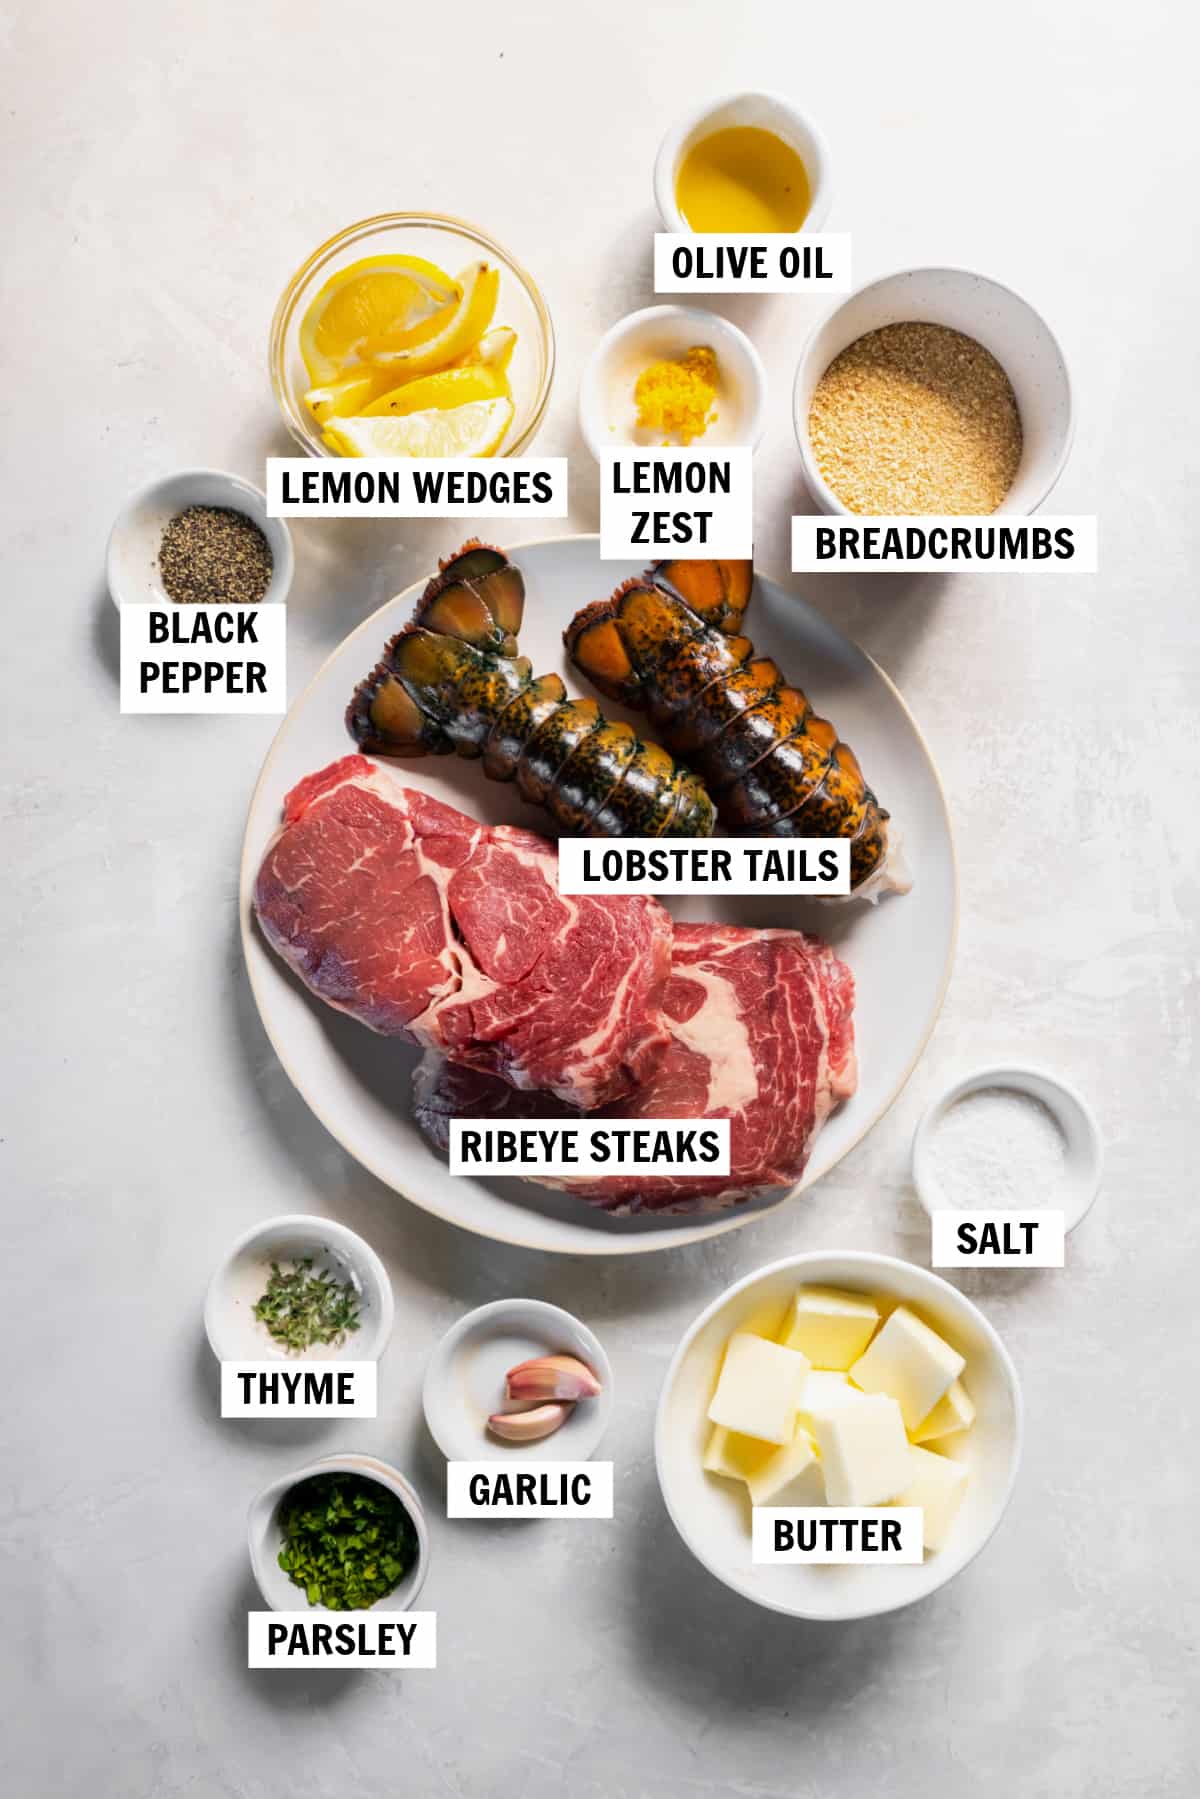 All of the ingredients for steak and lobster on a countertop in small bowls including steak, lobster tails, butter, garlic, parsley, thyme, salt and pepper, lemon zest, breadcrumbs and olive oil.